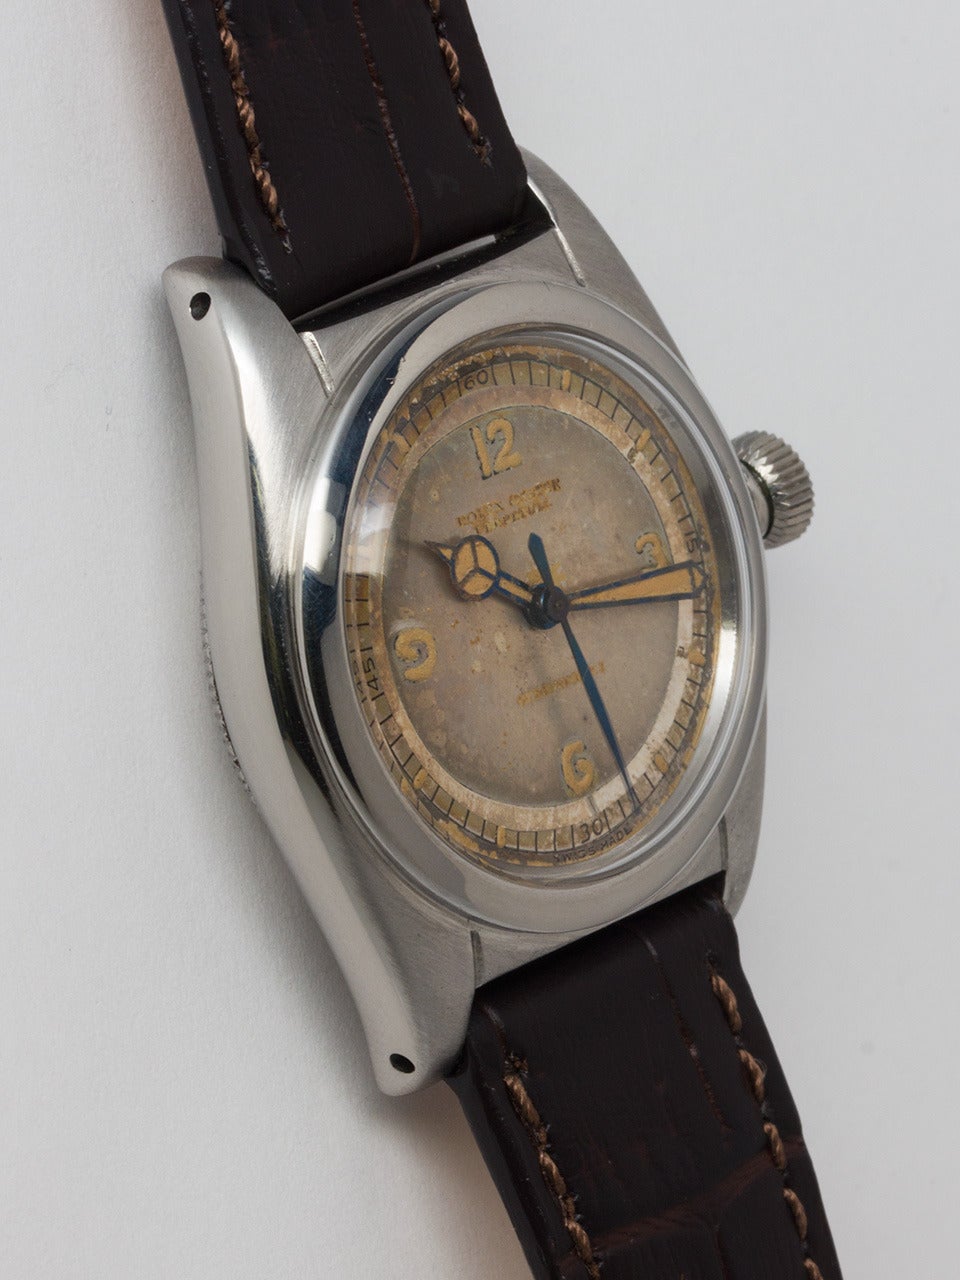 Rolex Stainless Steel Bubbleback Wristwatch ref 1102 serial # 107,xxx circa 1941. Early flat back case pre U.S. distribution model, measuring 31mm. With patina'd and faded, but still very interesting original mirrored track sector dial with luminous